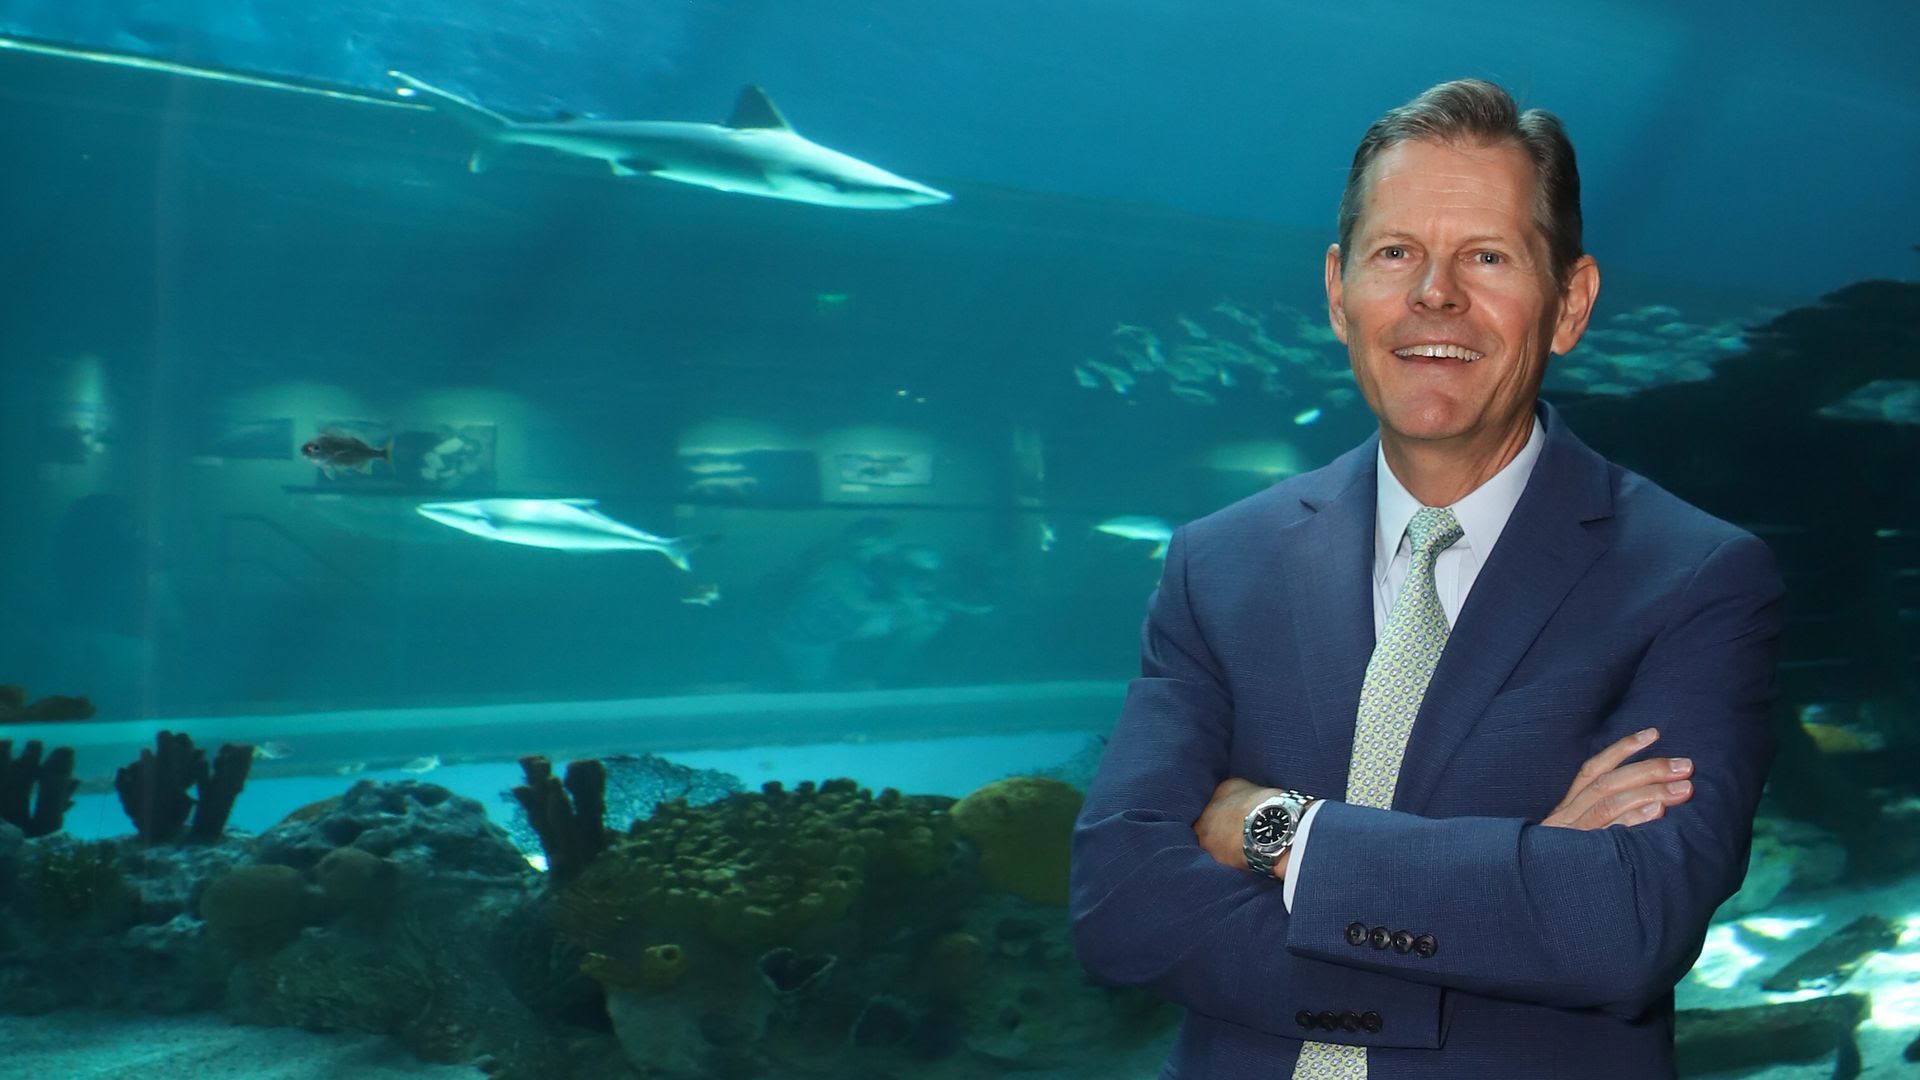 Tom Schmid, the new CEO of the Columbus Zoo and Aquarium, stands in front of an aquarium 